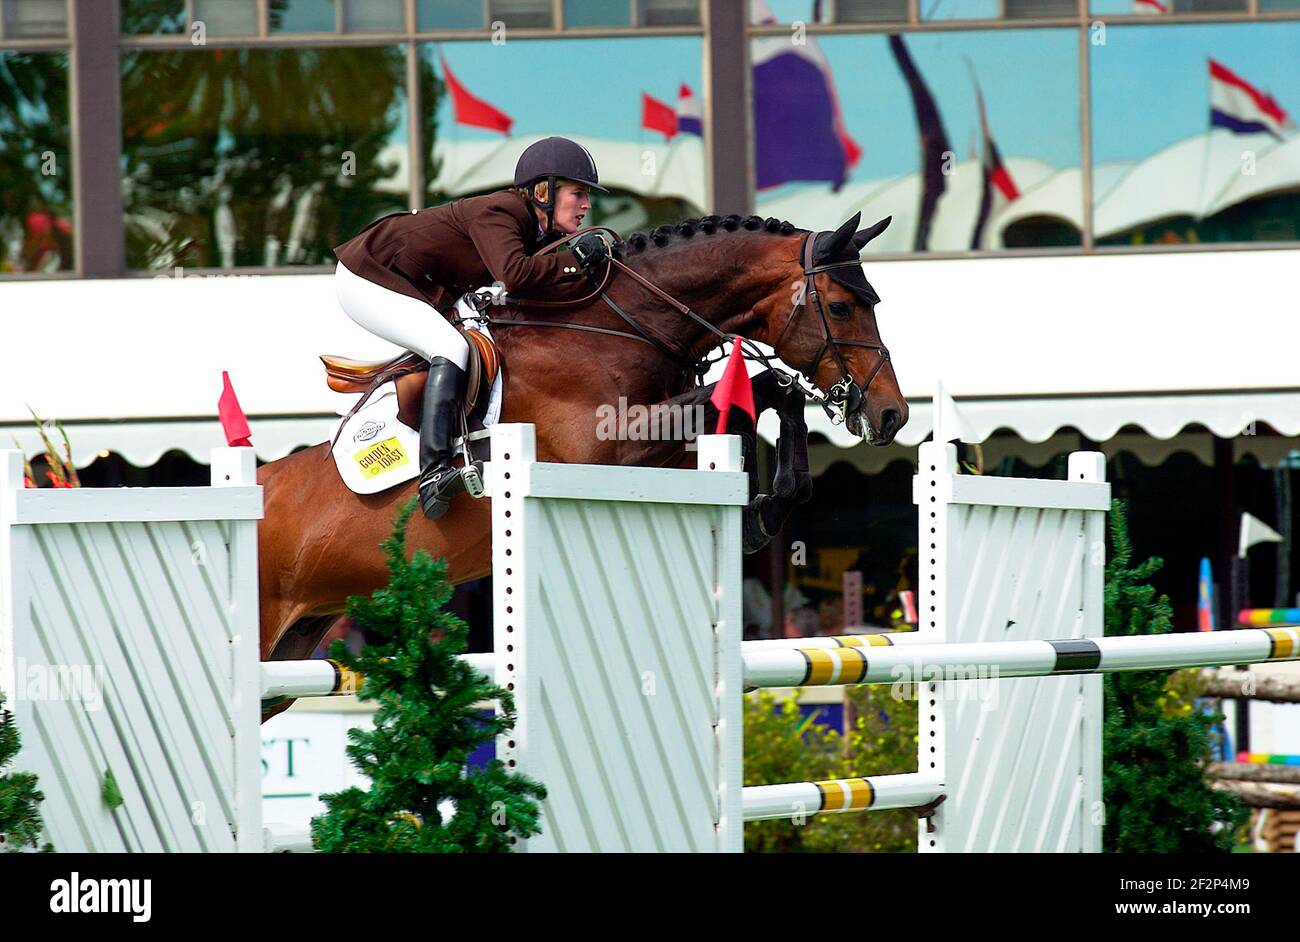 CSIO Meister, Spruce Meadows, August 2000, Meredith Michaels-Beerbaum (GER) Reiten Concetto Stockfoto